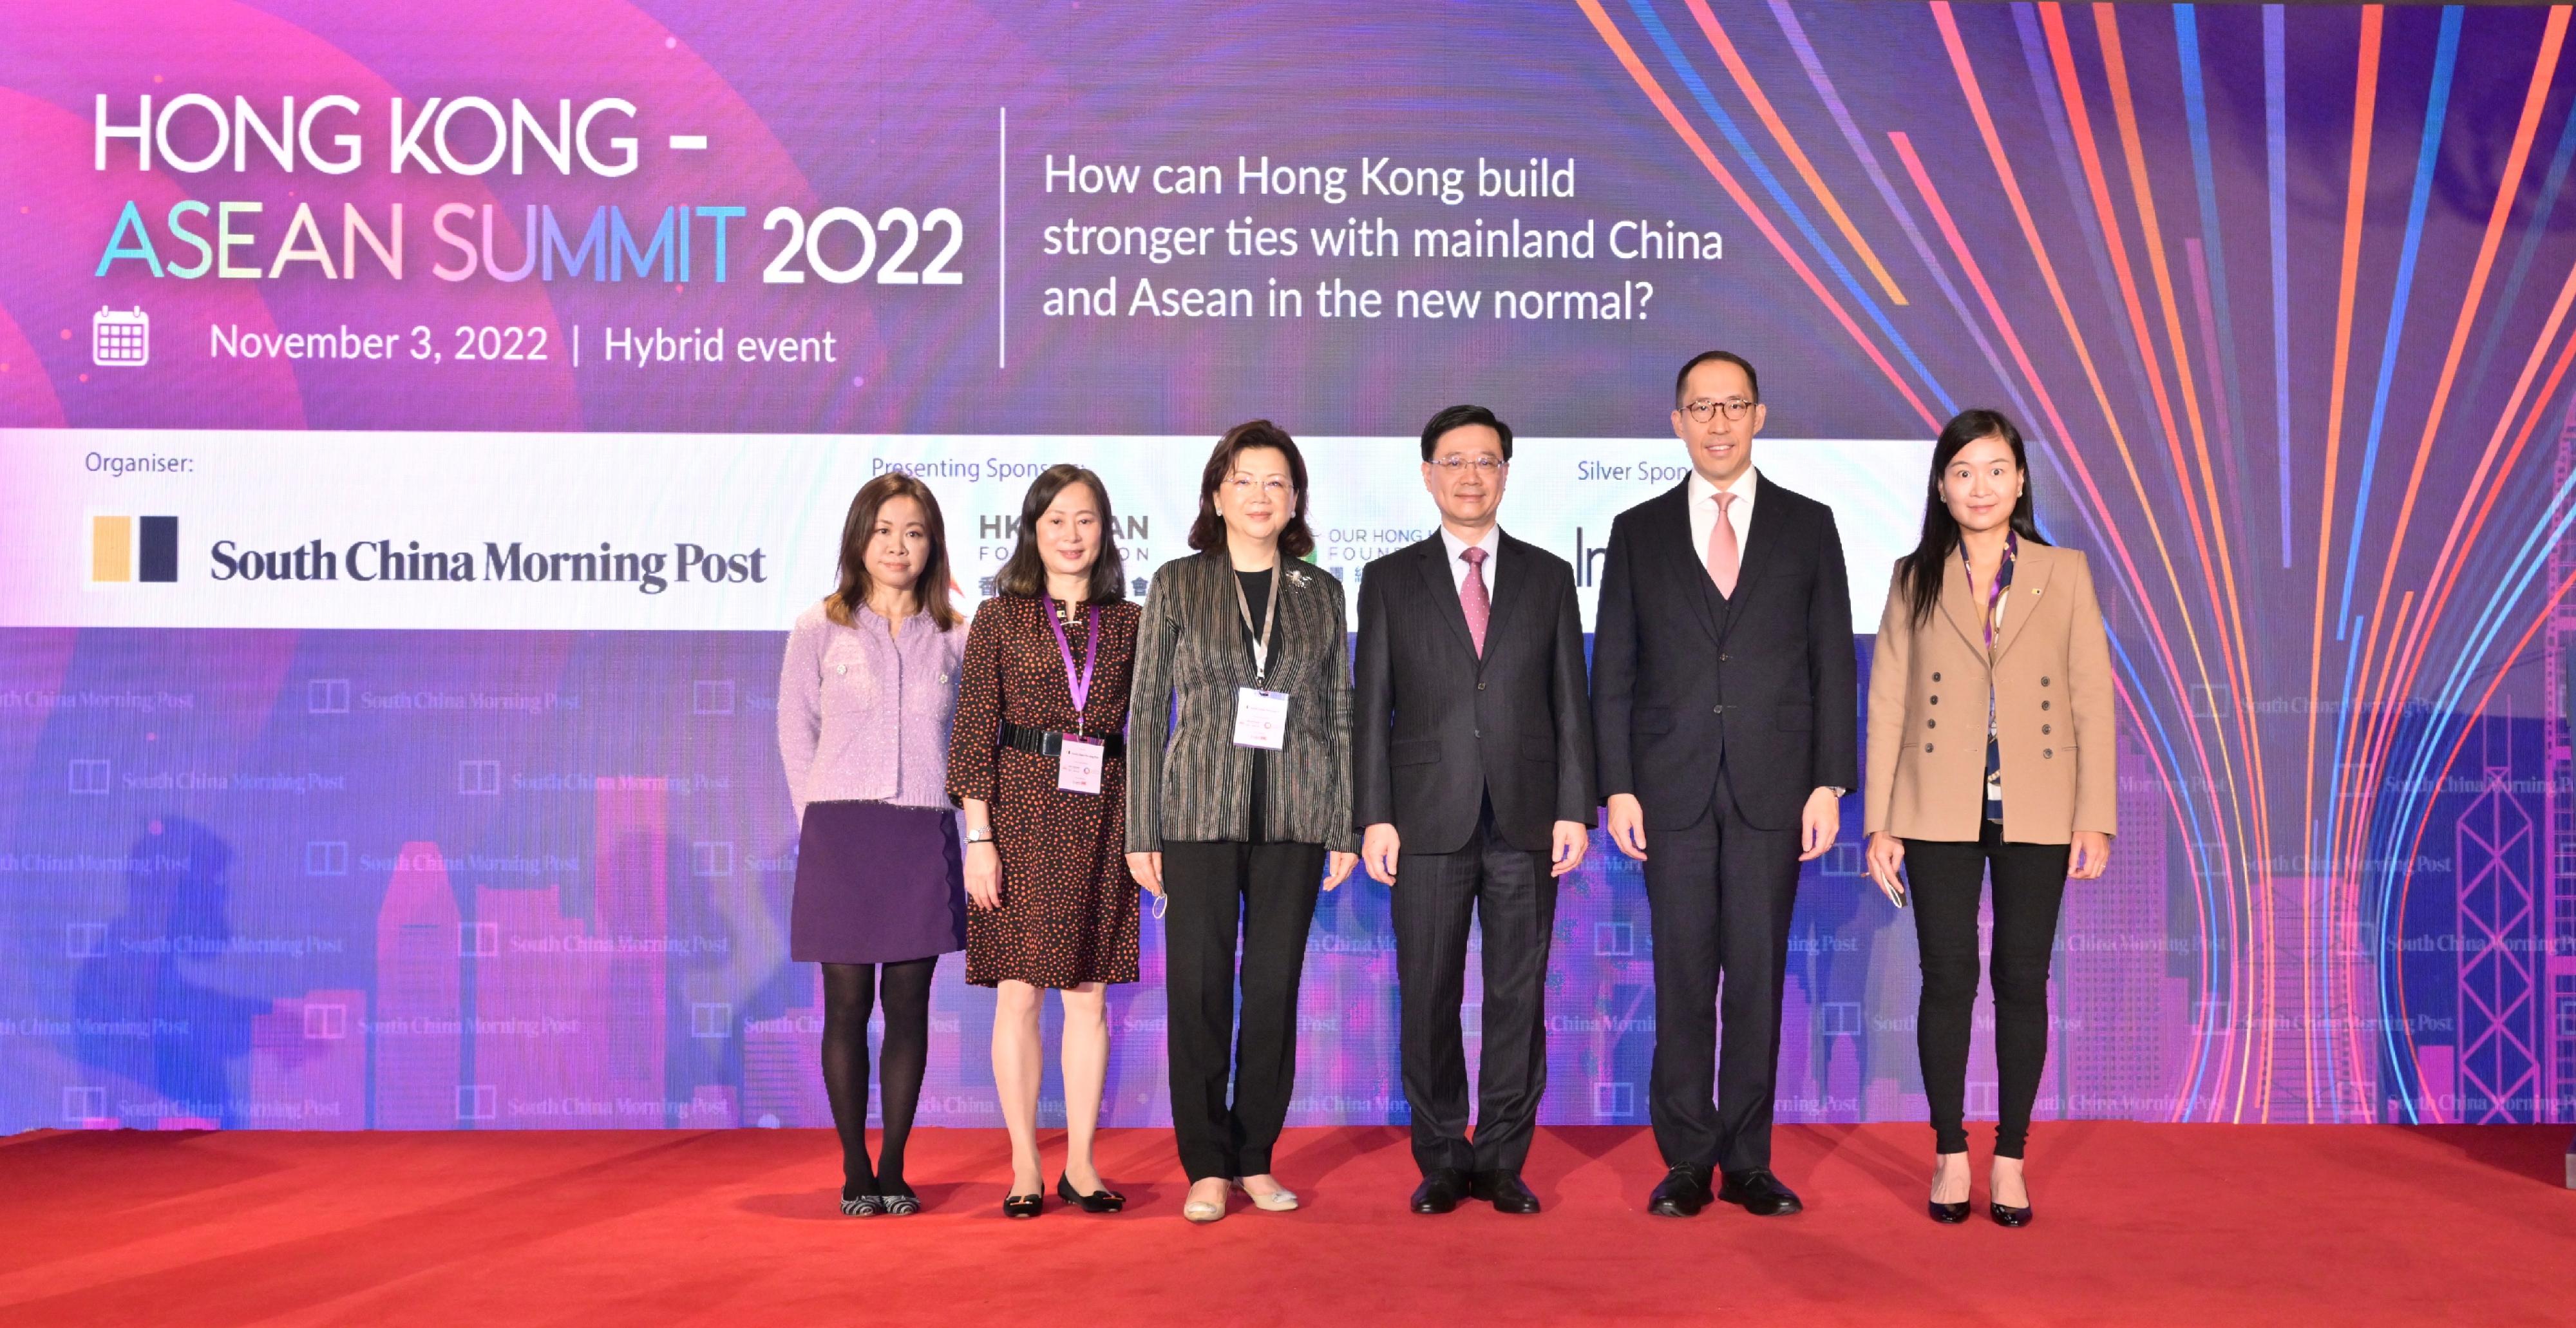 The Chief Executive, Mr John Lee, attended the Hong Kong - ASEAN Summit 2022 today (November 3). Photo shows (from left) the Chief Marketing Officer of Invest Hong Kong, Ms Edith Wong; the Editor-in-Chief of the South China Morning Post (SCMP), Ms Tammy Tam; the President of the Our Hong Kong Foundation, Mrs Eva Cheng; Mr Lee; the Chairman of the Hong Kong-ASEAN Foundation, Dr Daryl Ng; and the Chief Executive Officer of the SCMP, Ms Catherine So, at the summit.